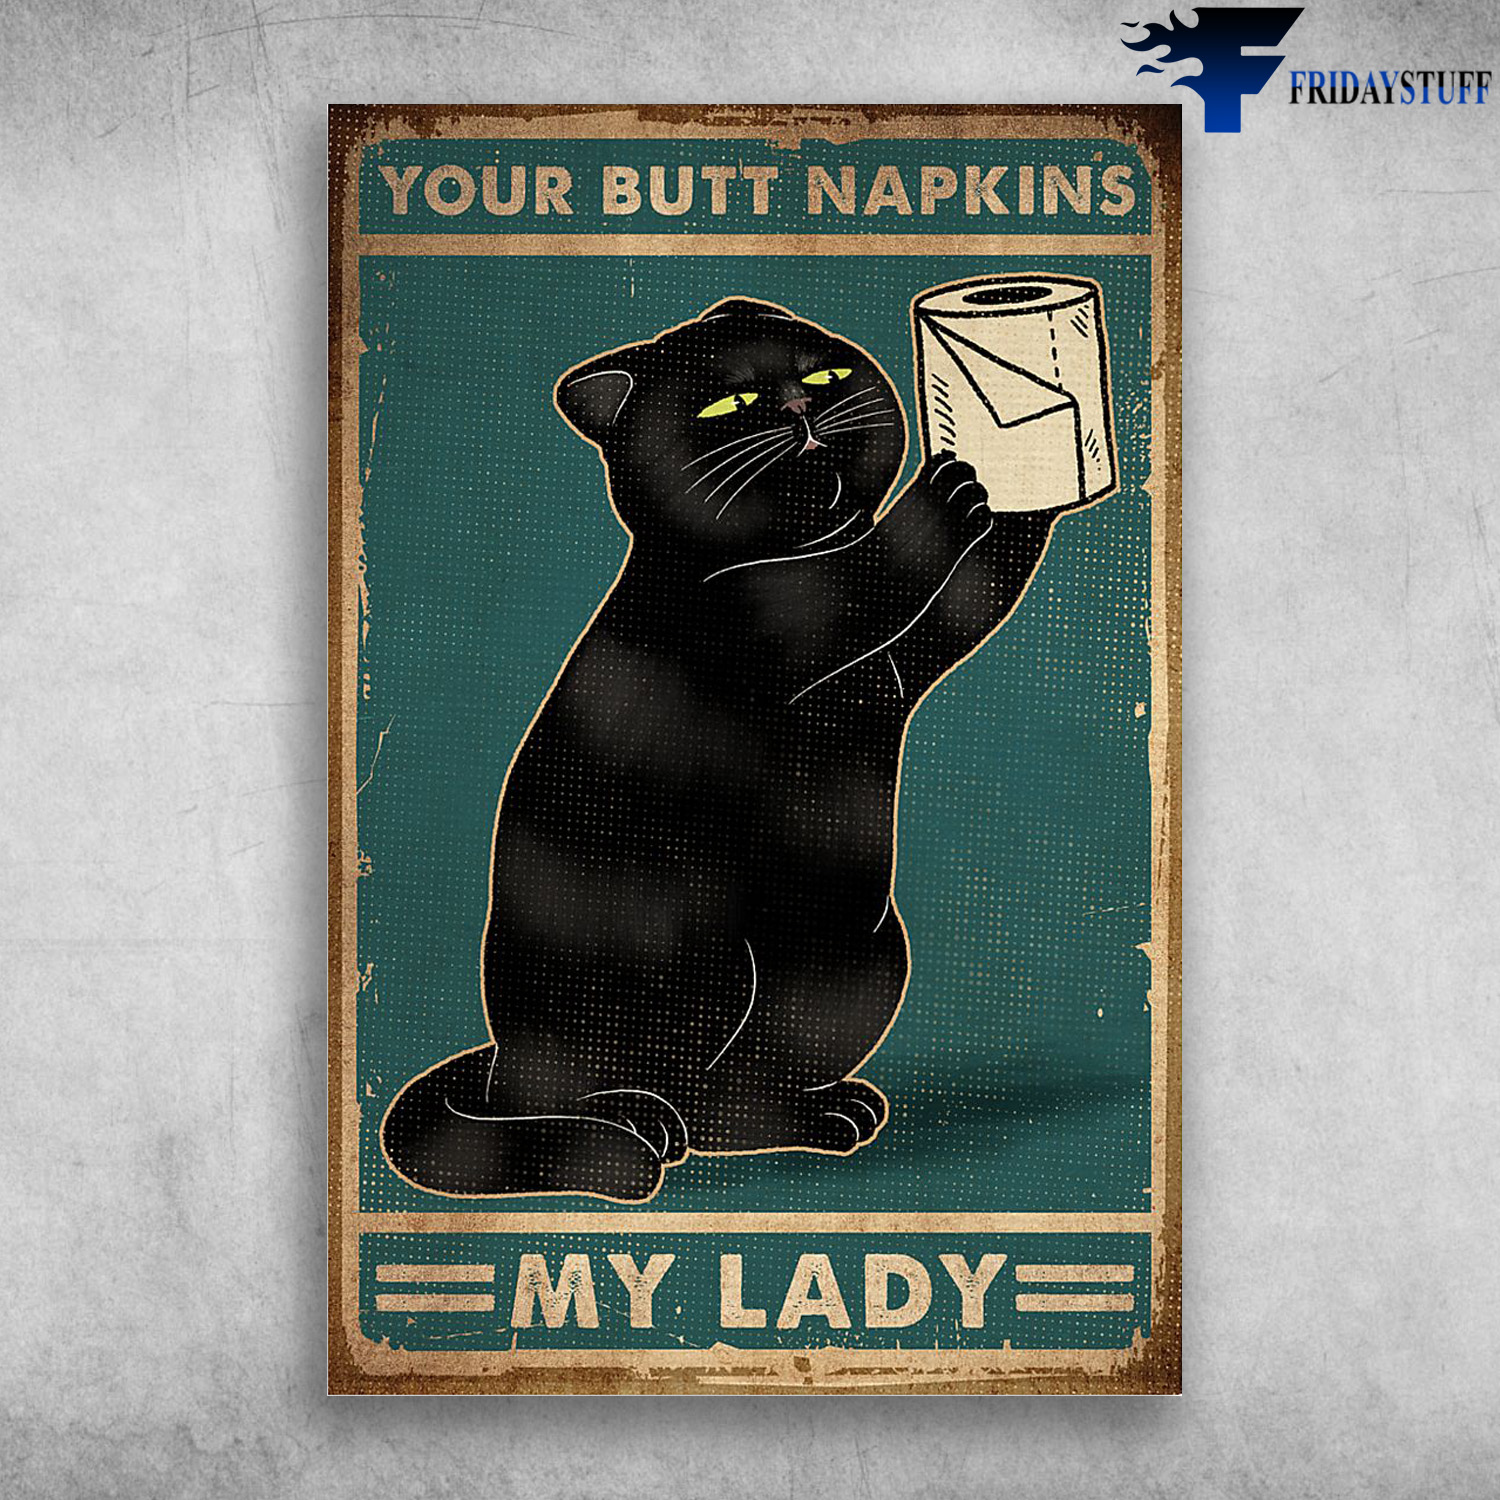 Black Cat Holding A Toilet Paper Roll - Your Butt Napkins, My Lady